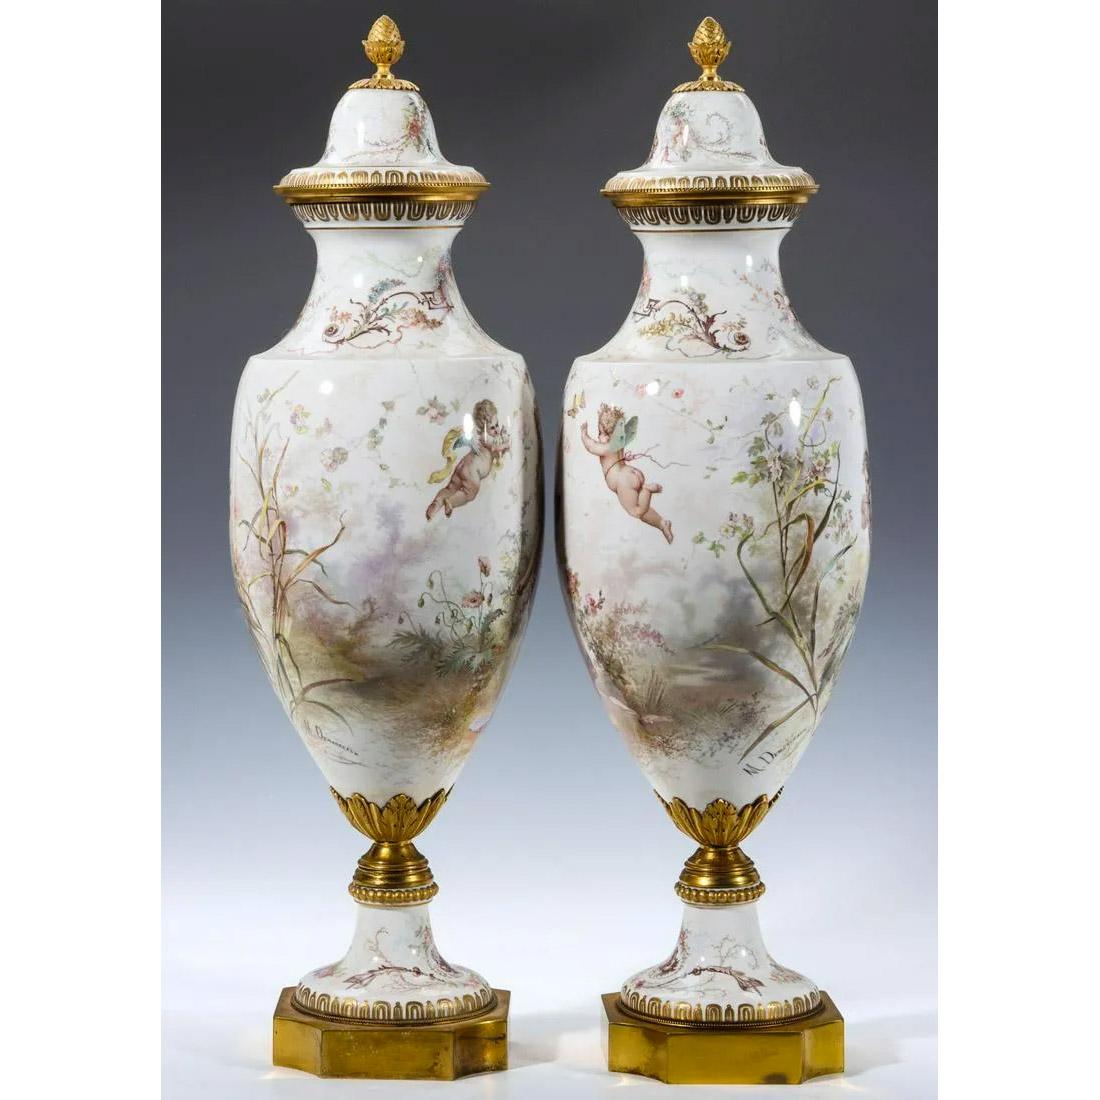 Fine Quality Pair of Sèvres Style Porcelain Vases and Cover by M. Demonceaux For Sale 1